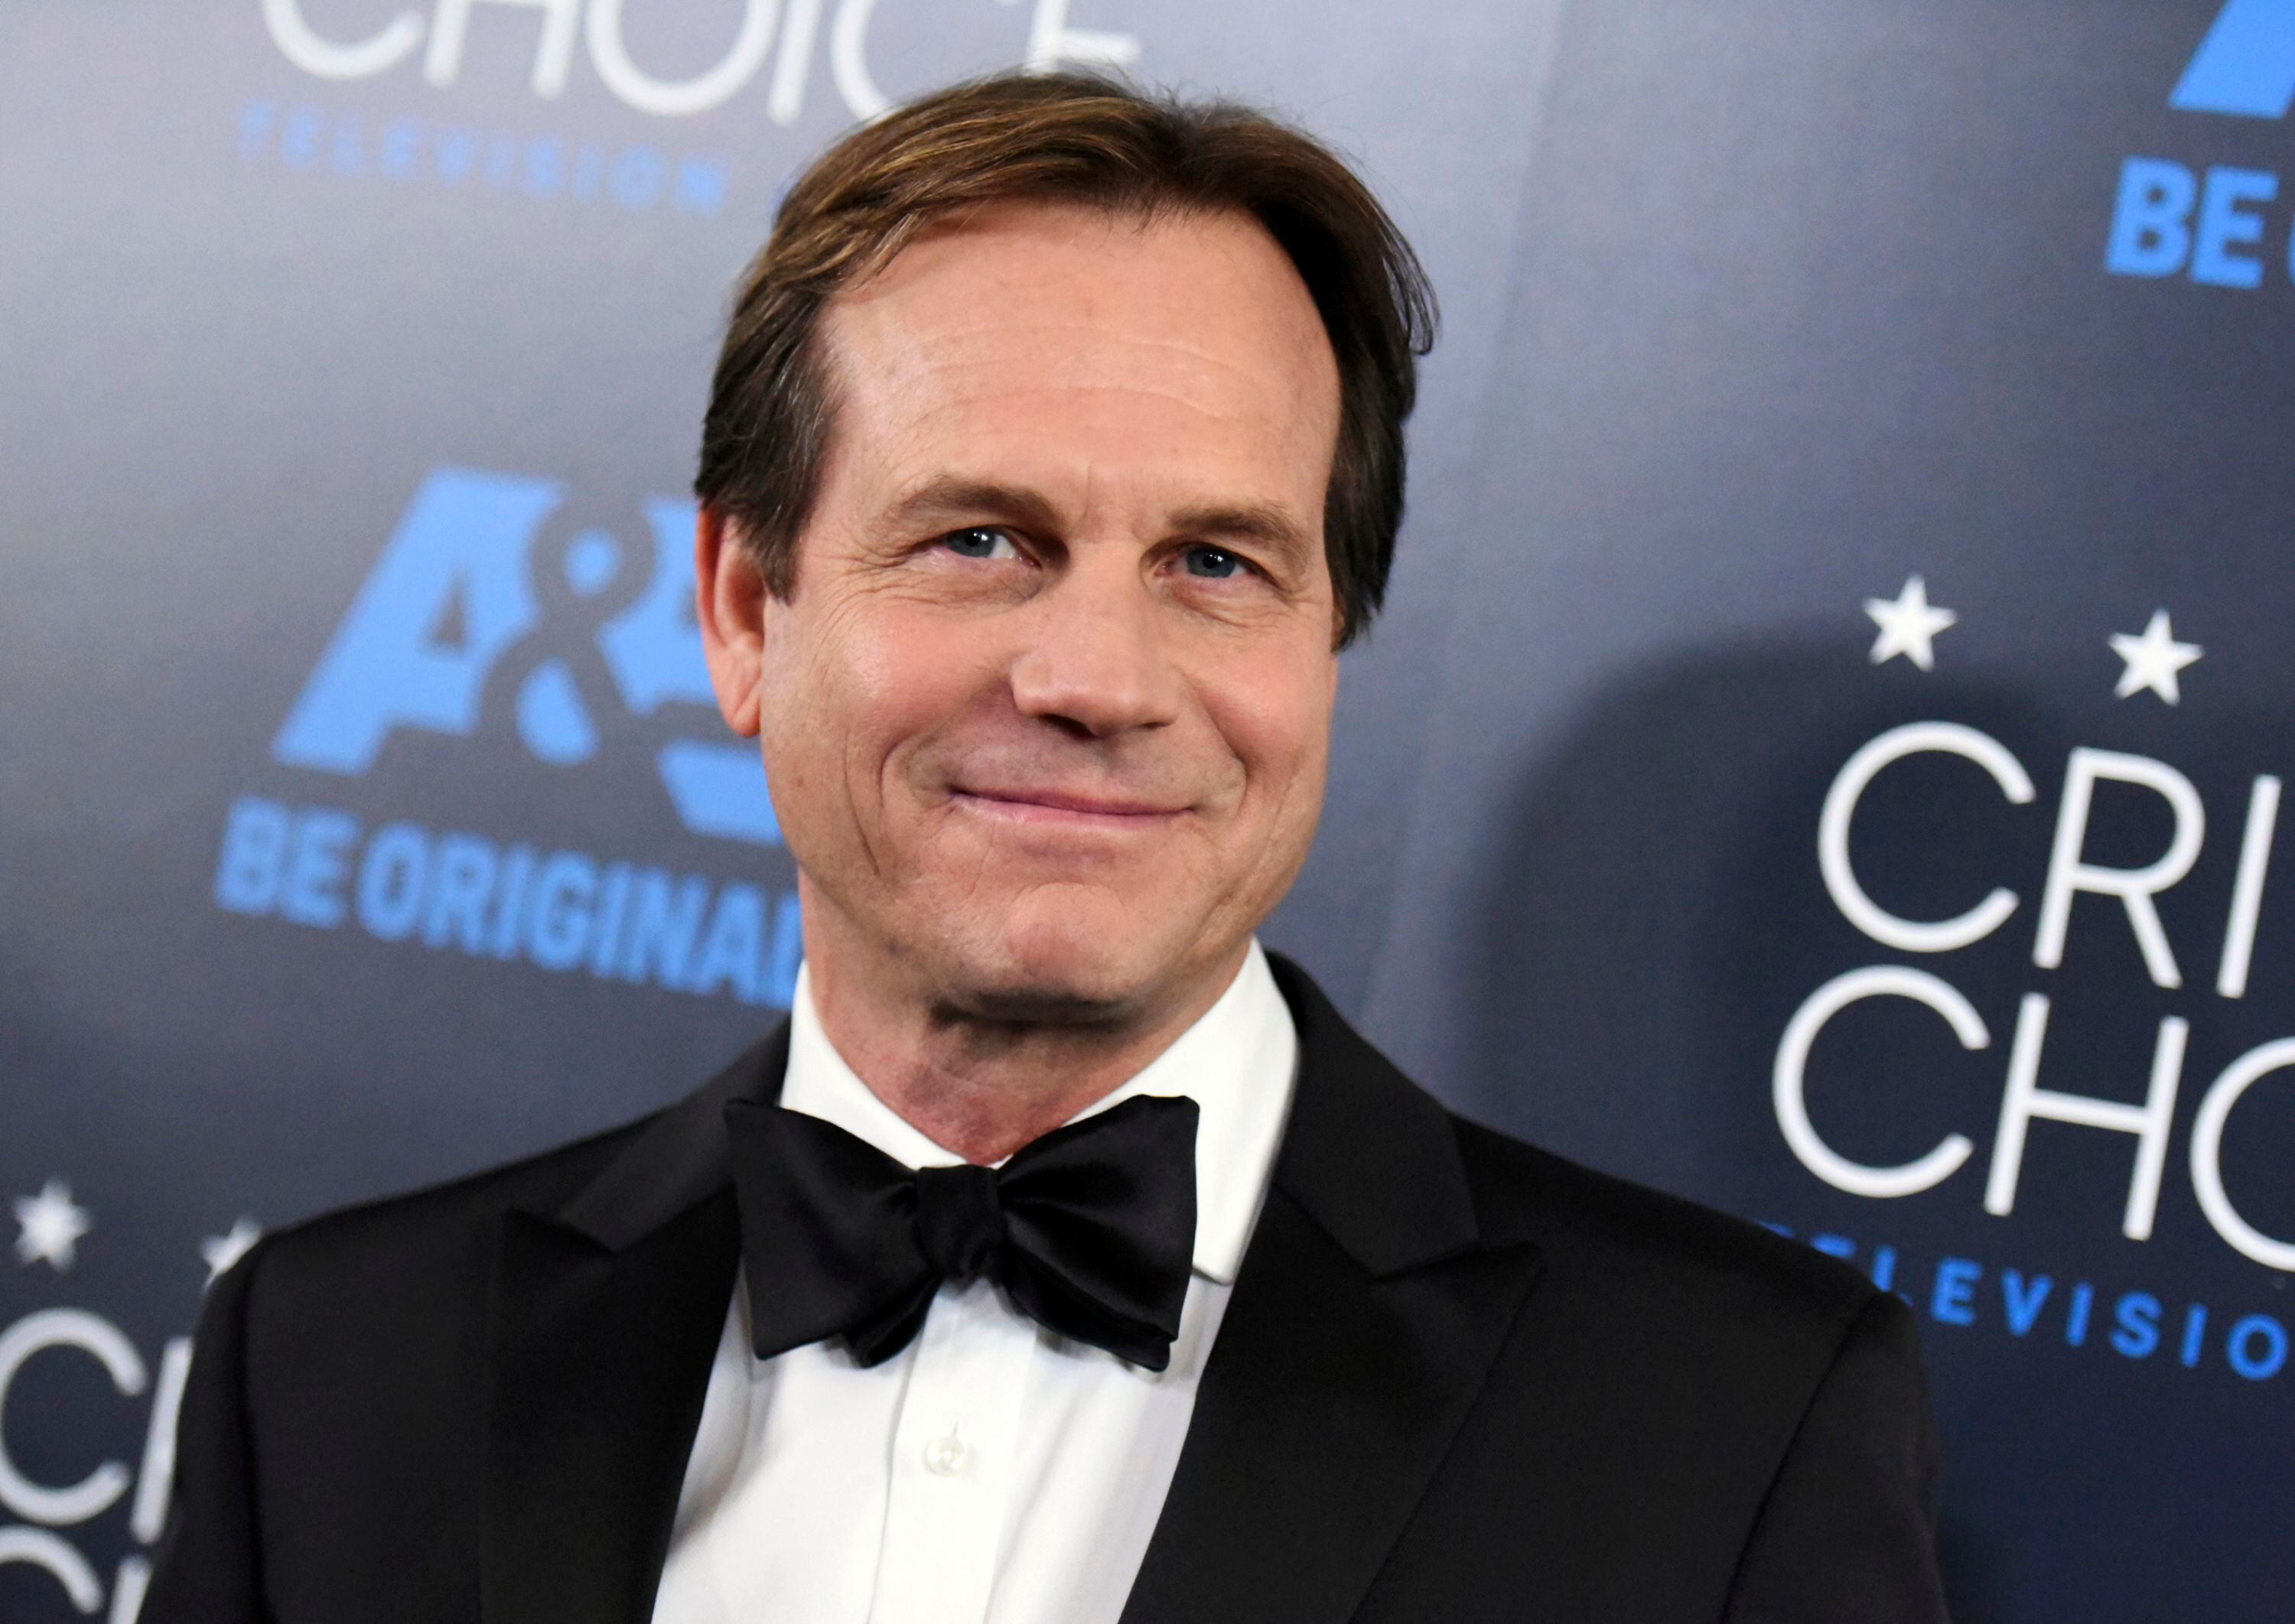 Bill Paxton family settles lawsuit with hospital over death